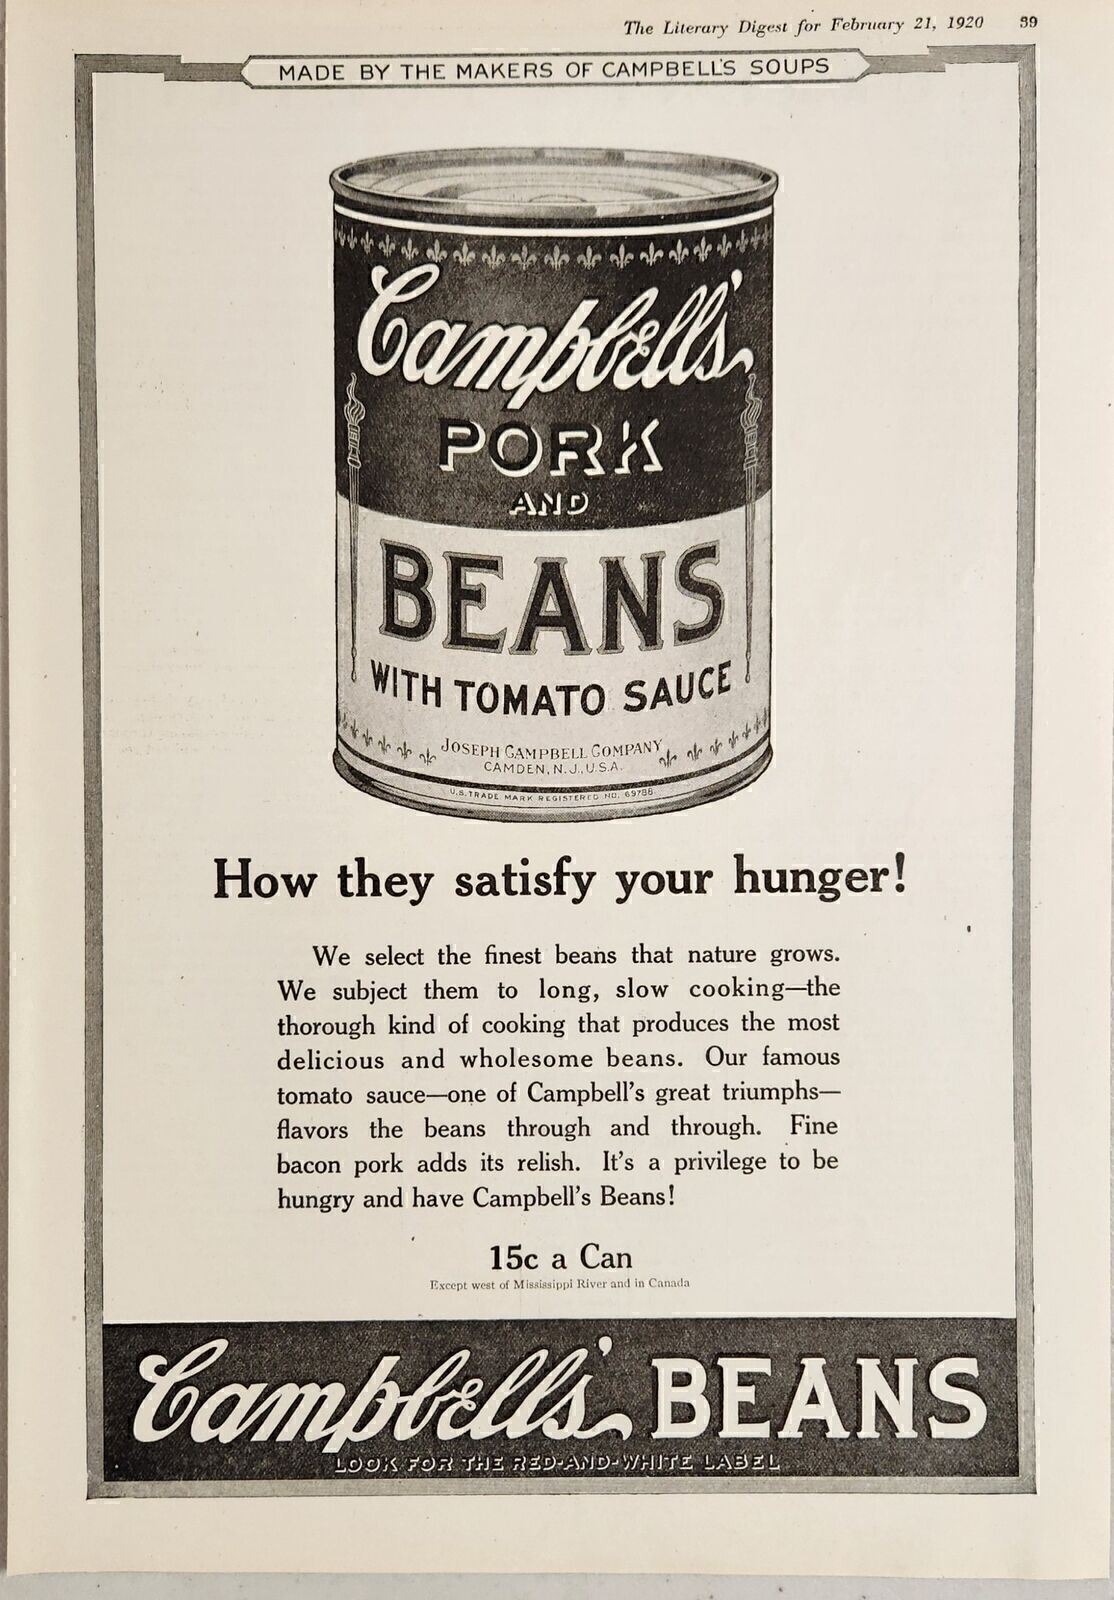 1921 Print Ad Campbell\'s Pork and Beans 15 cents a Can Satisfy Your Hunger